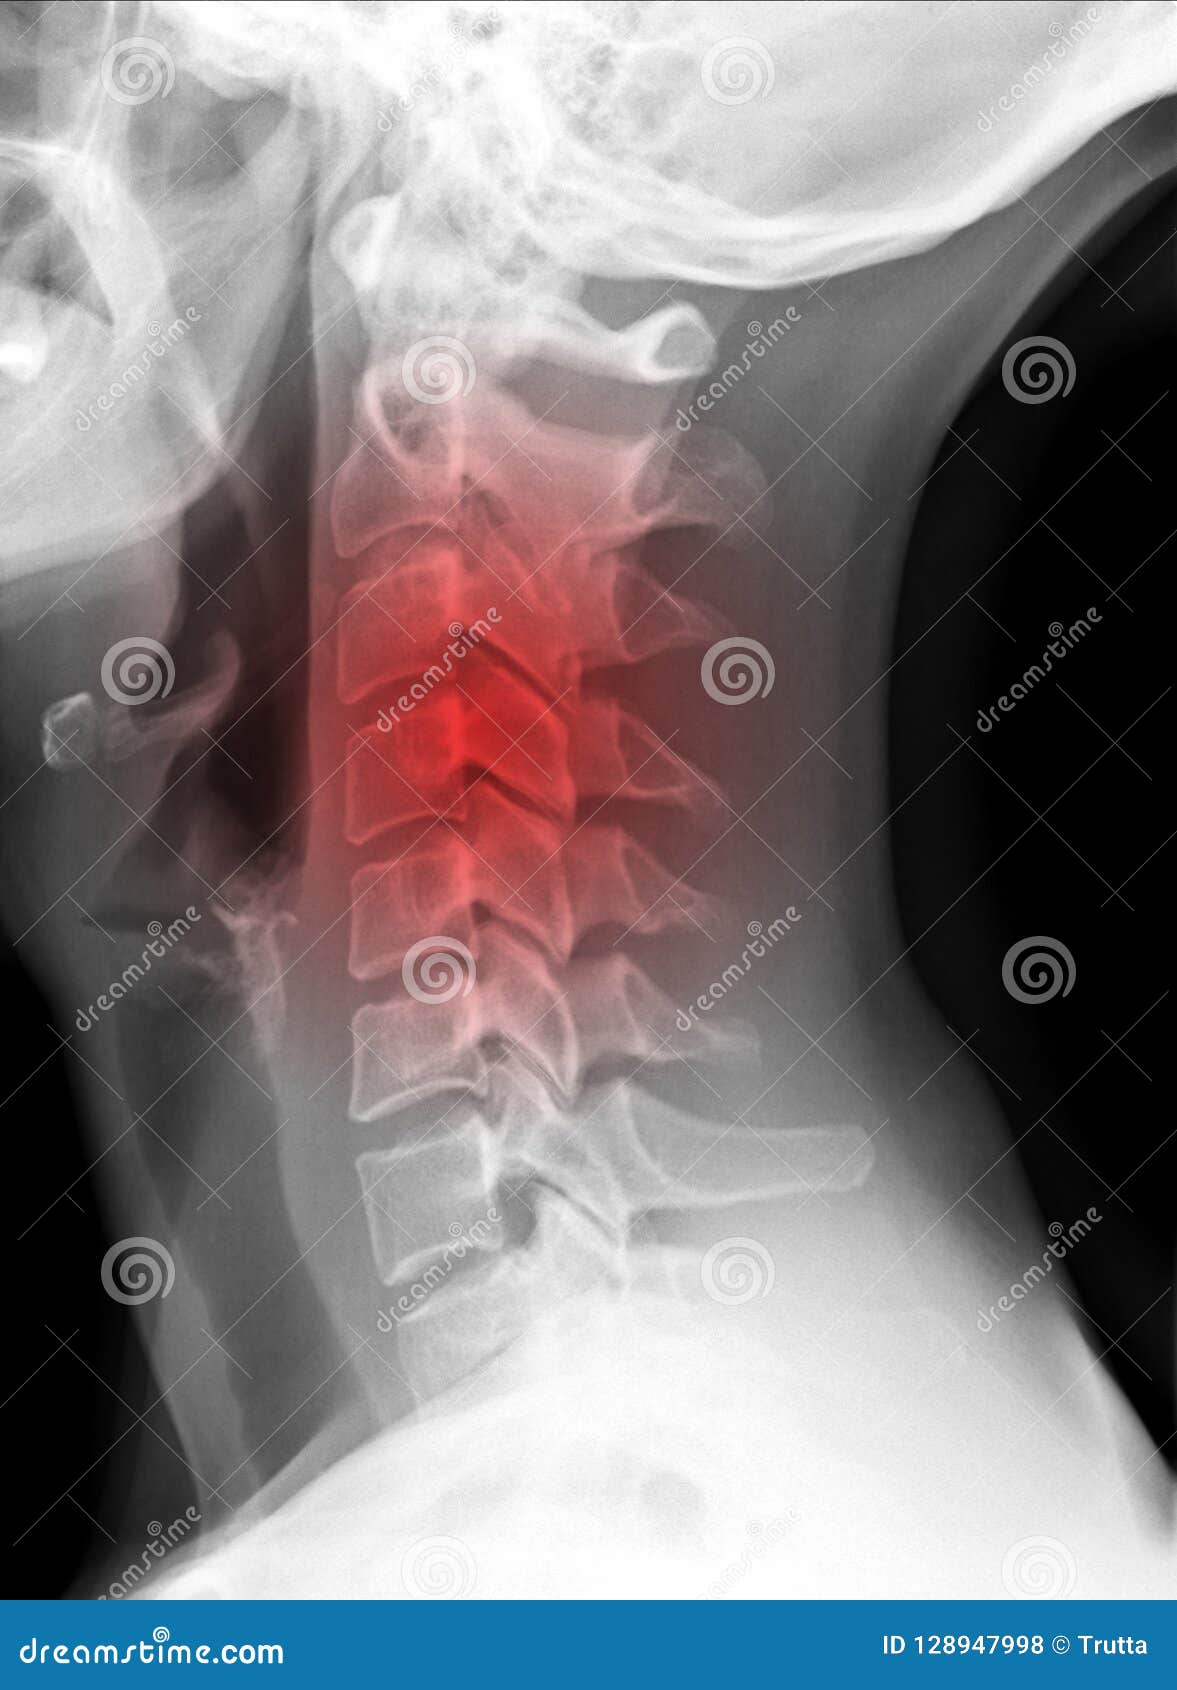 x-ray picture - cervical spine